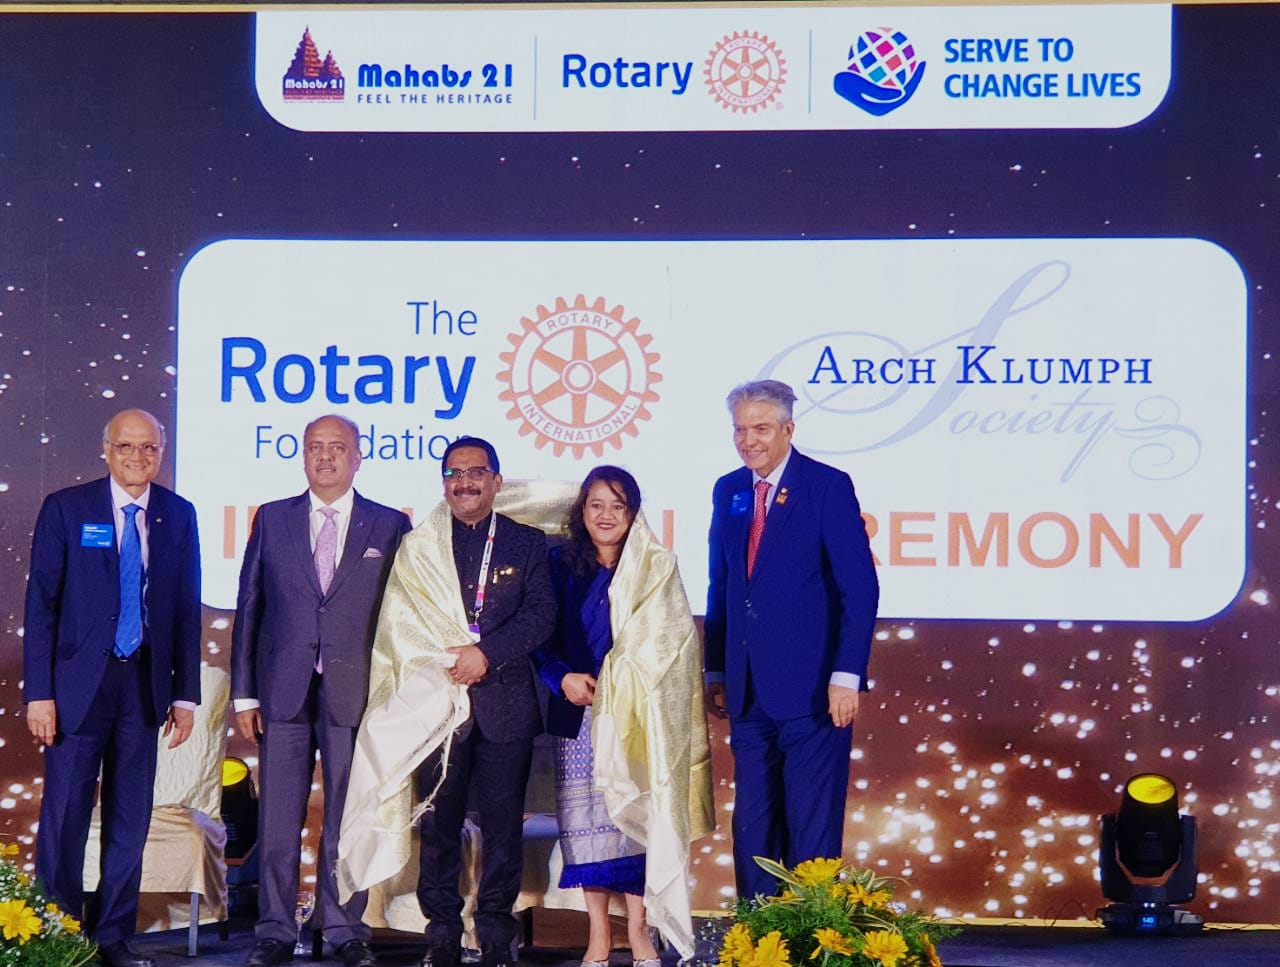 TRF -Felicitation of PDG Debasish and Anne Charish were specially felicitated at the Rotary Institute for their contribution to TRF.